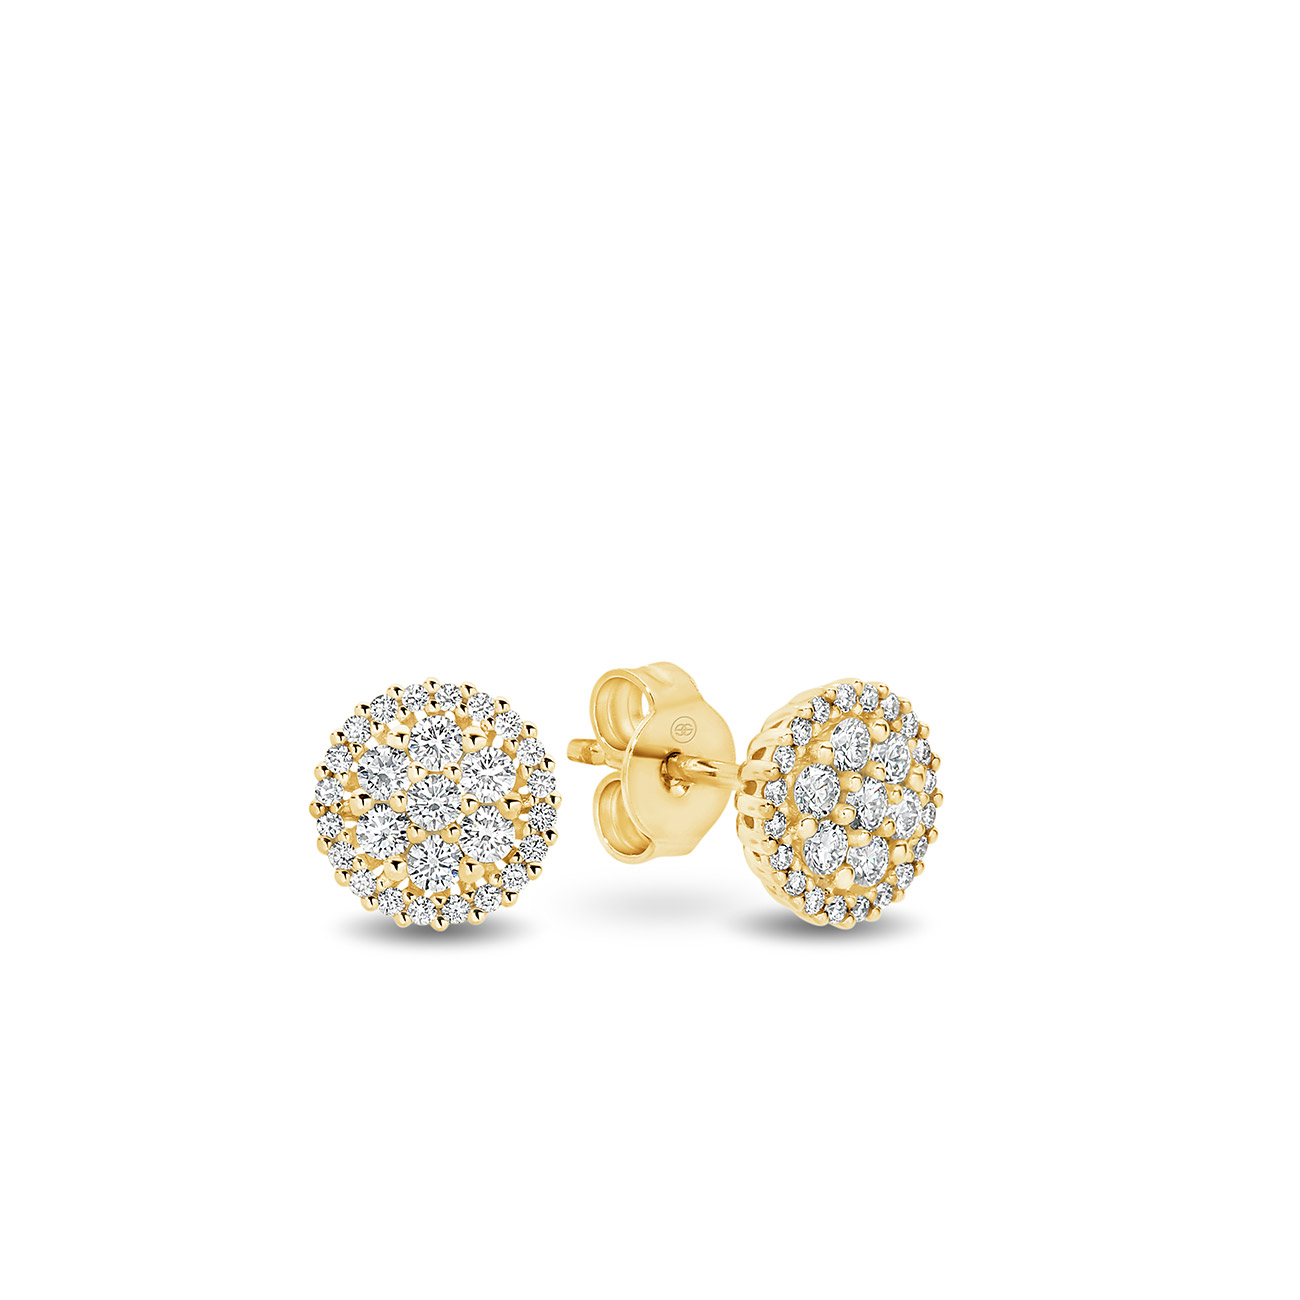 18K Yellow Gold Round Cluster Diamond Stud Earrings - Large